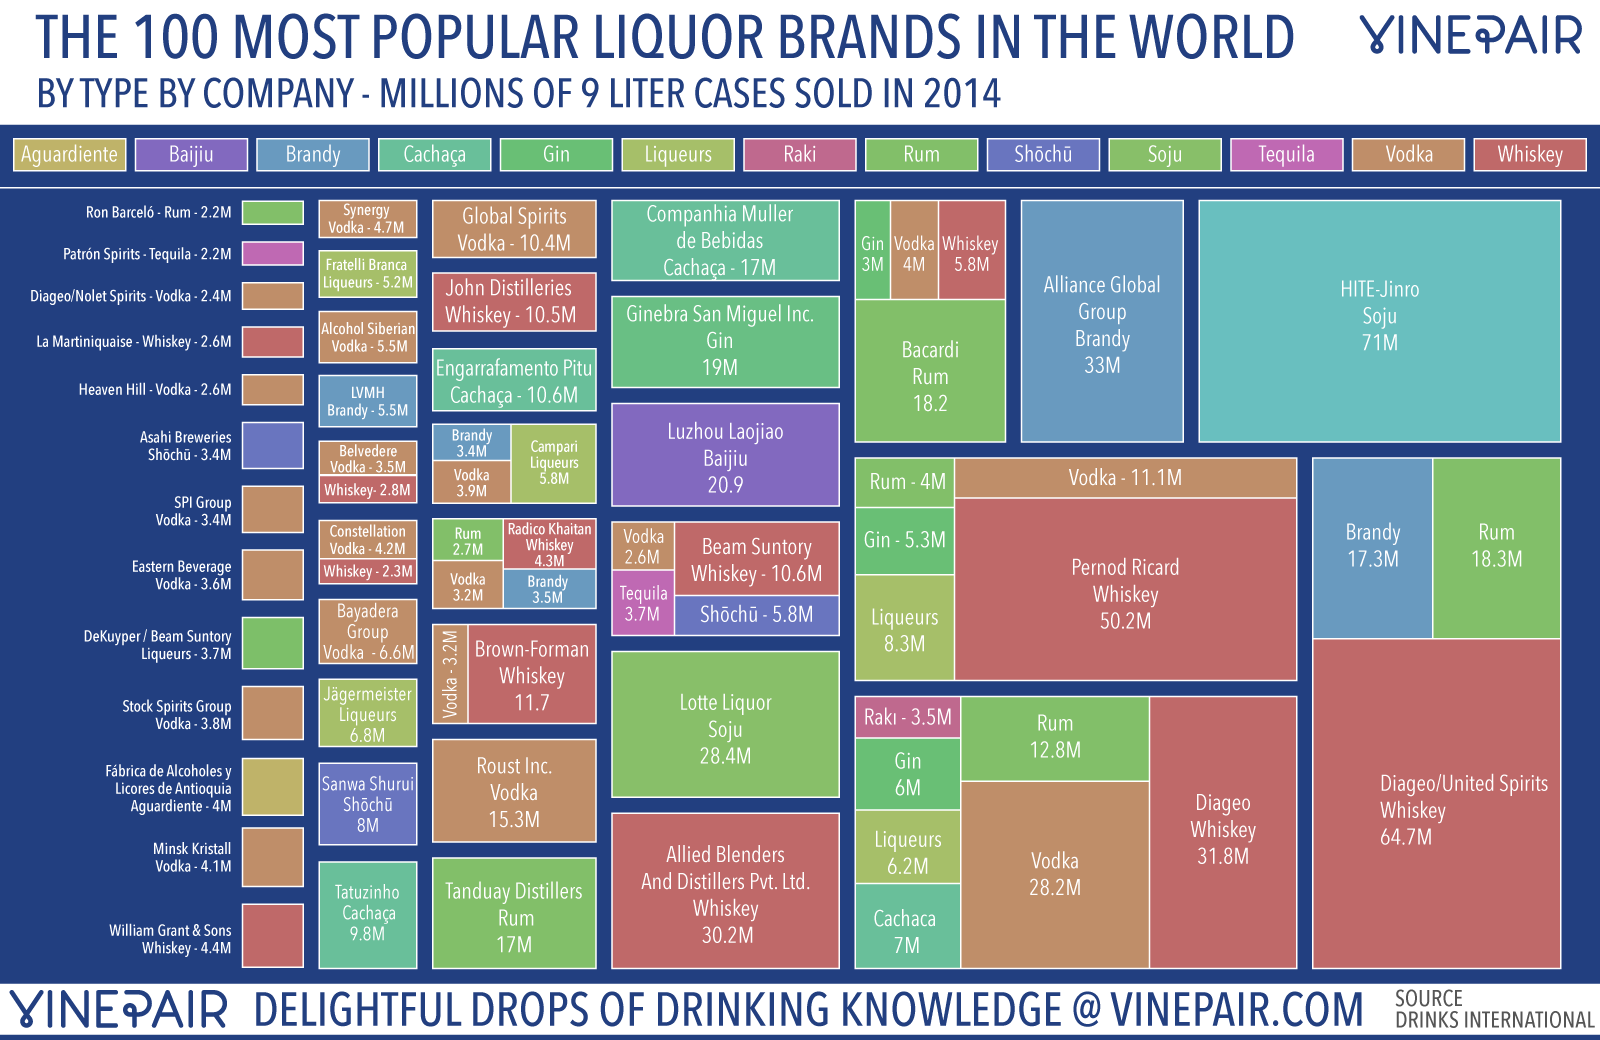 The Companies Who Sell The World's Top 100 Liquor Brands